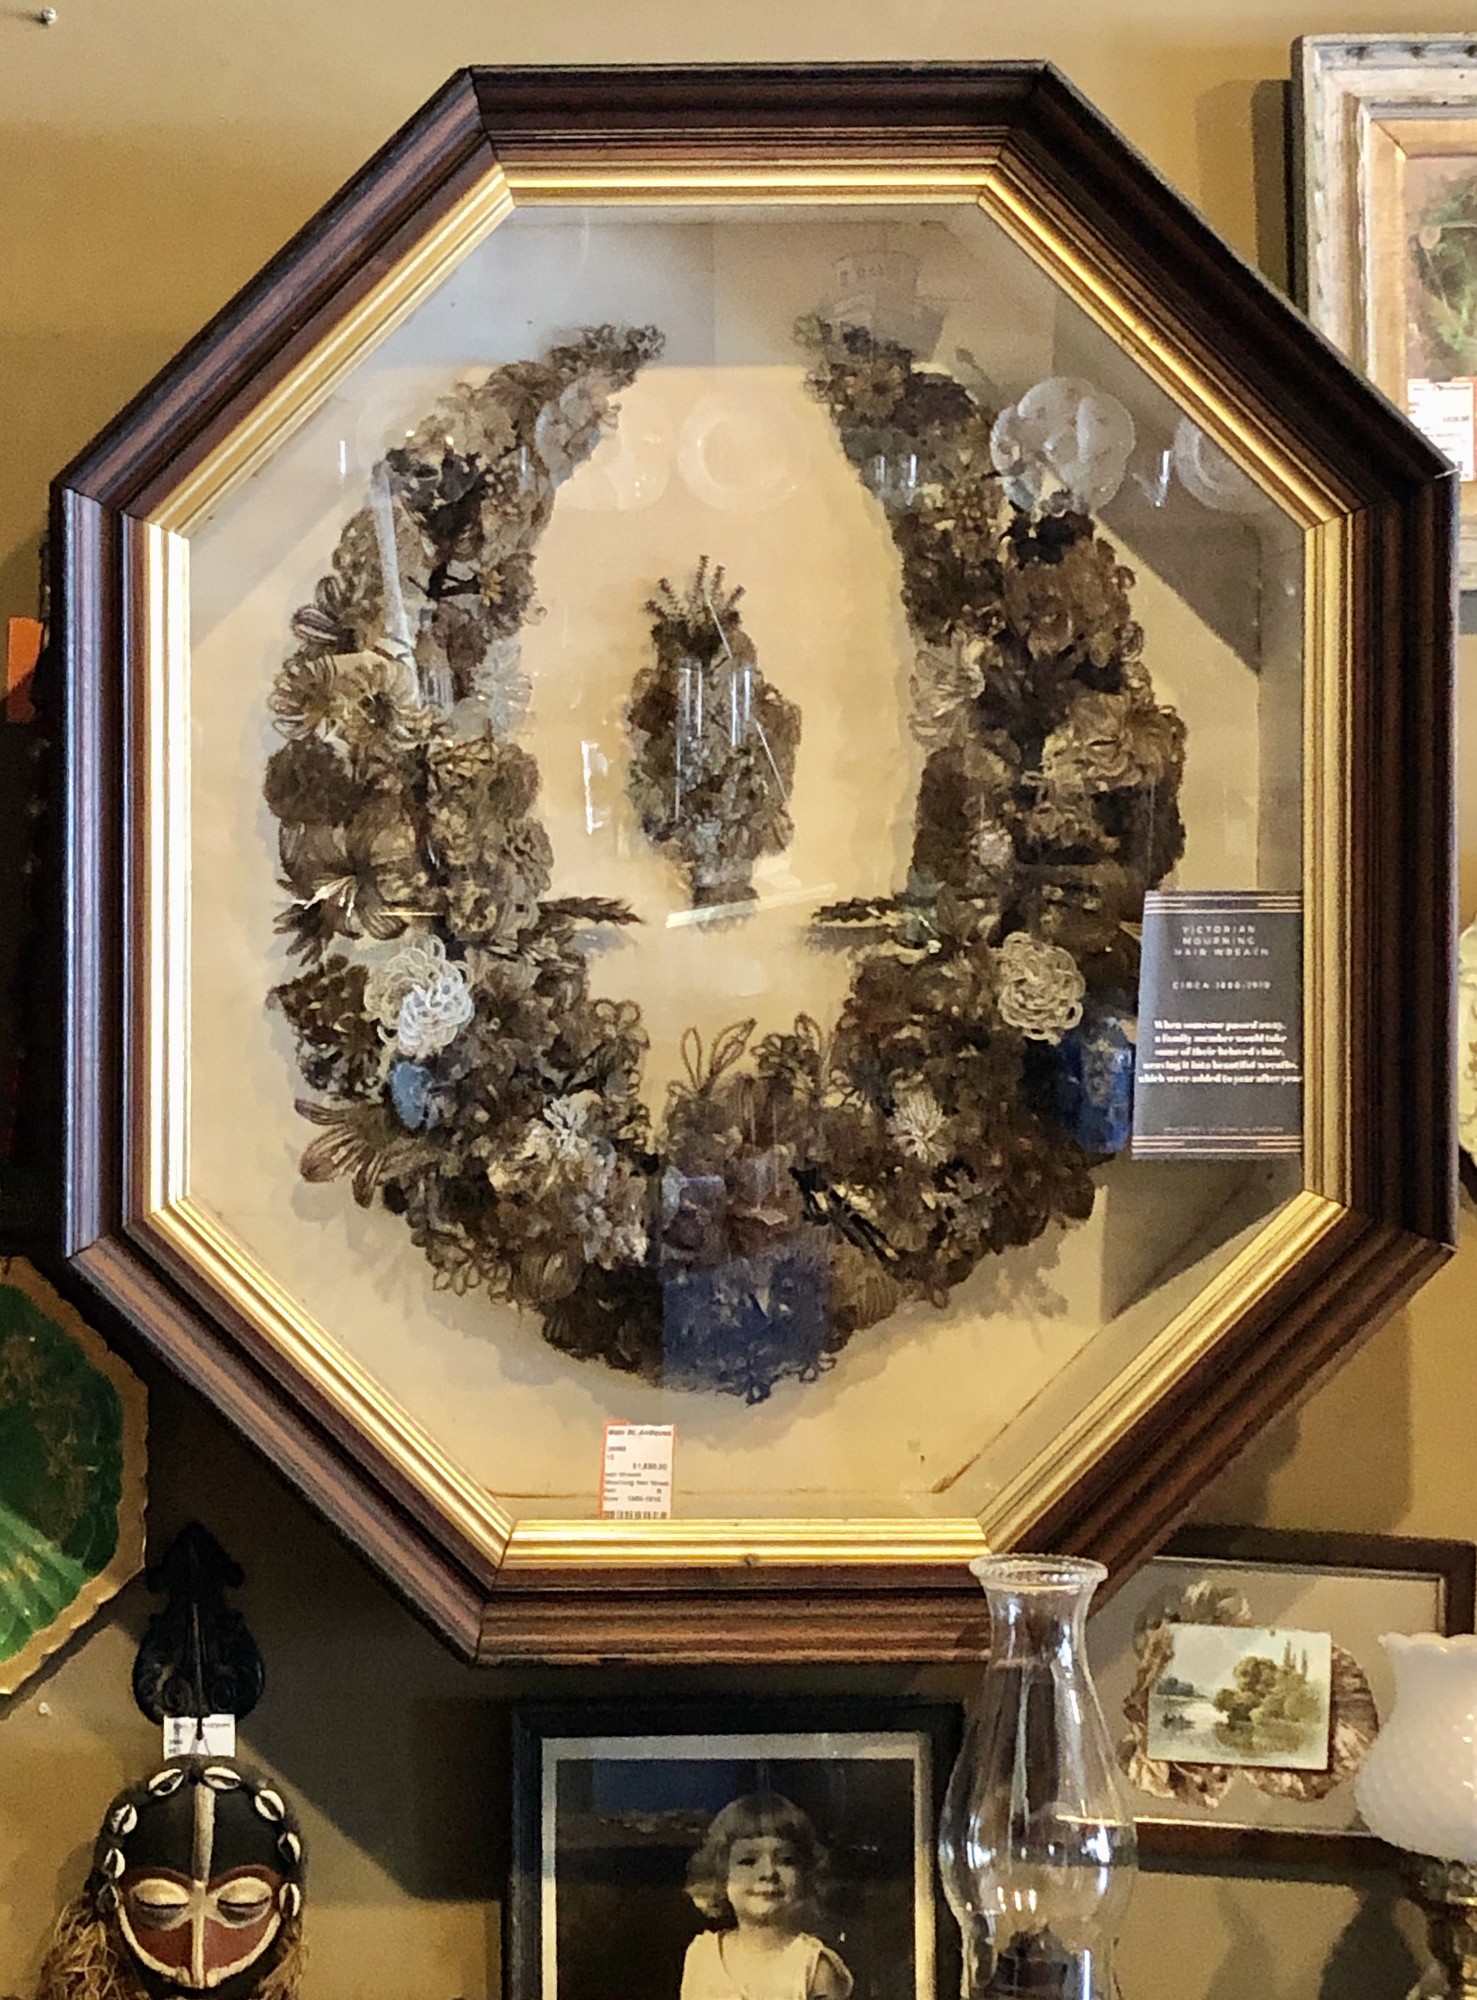 Mourning Hair Wreath. Large and museum quality in its original frame. Perfect for your Victorian decor. c.1880-1910.
Available for in-store pickup only.